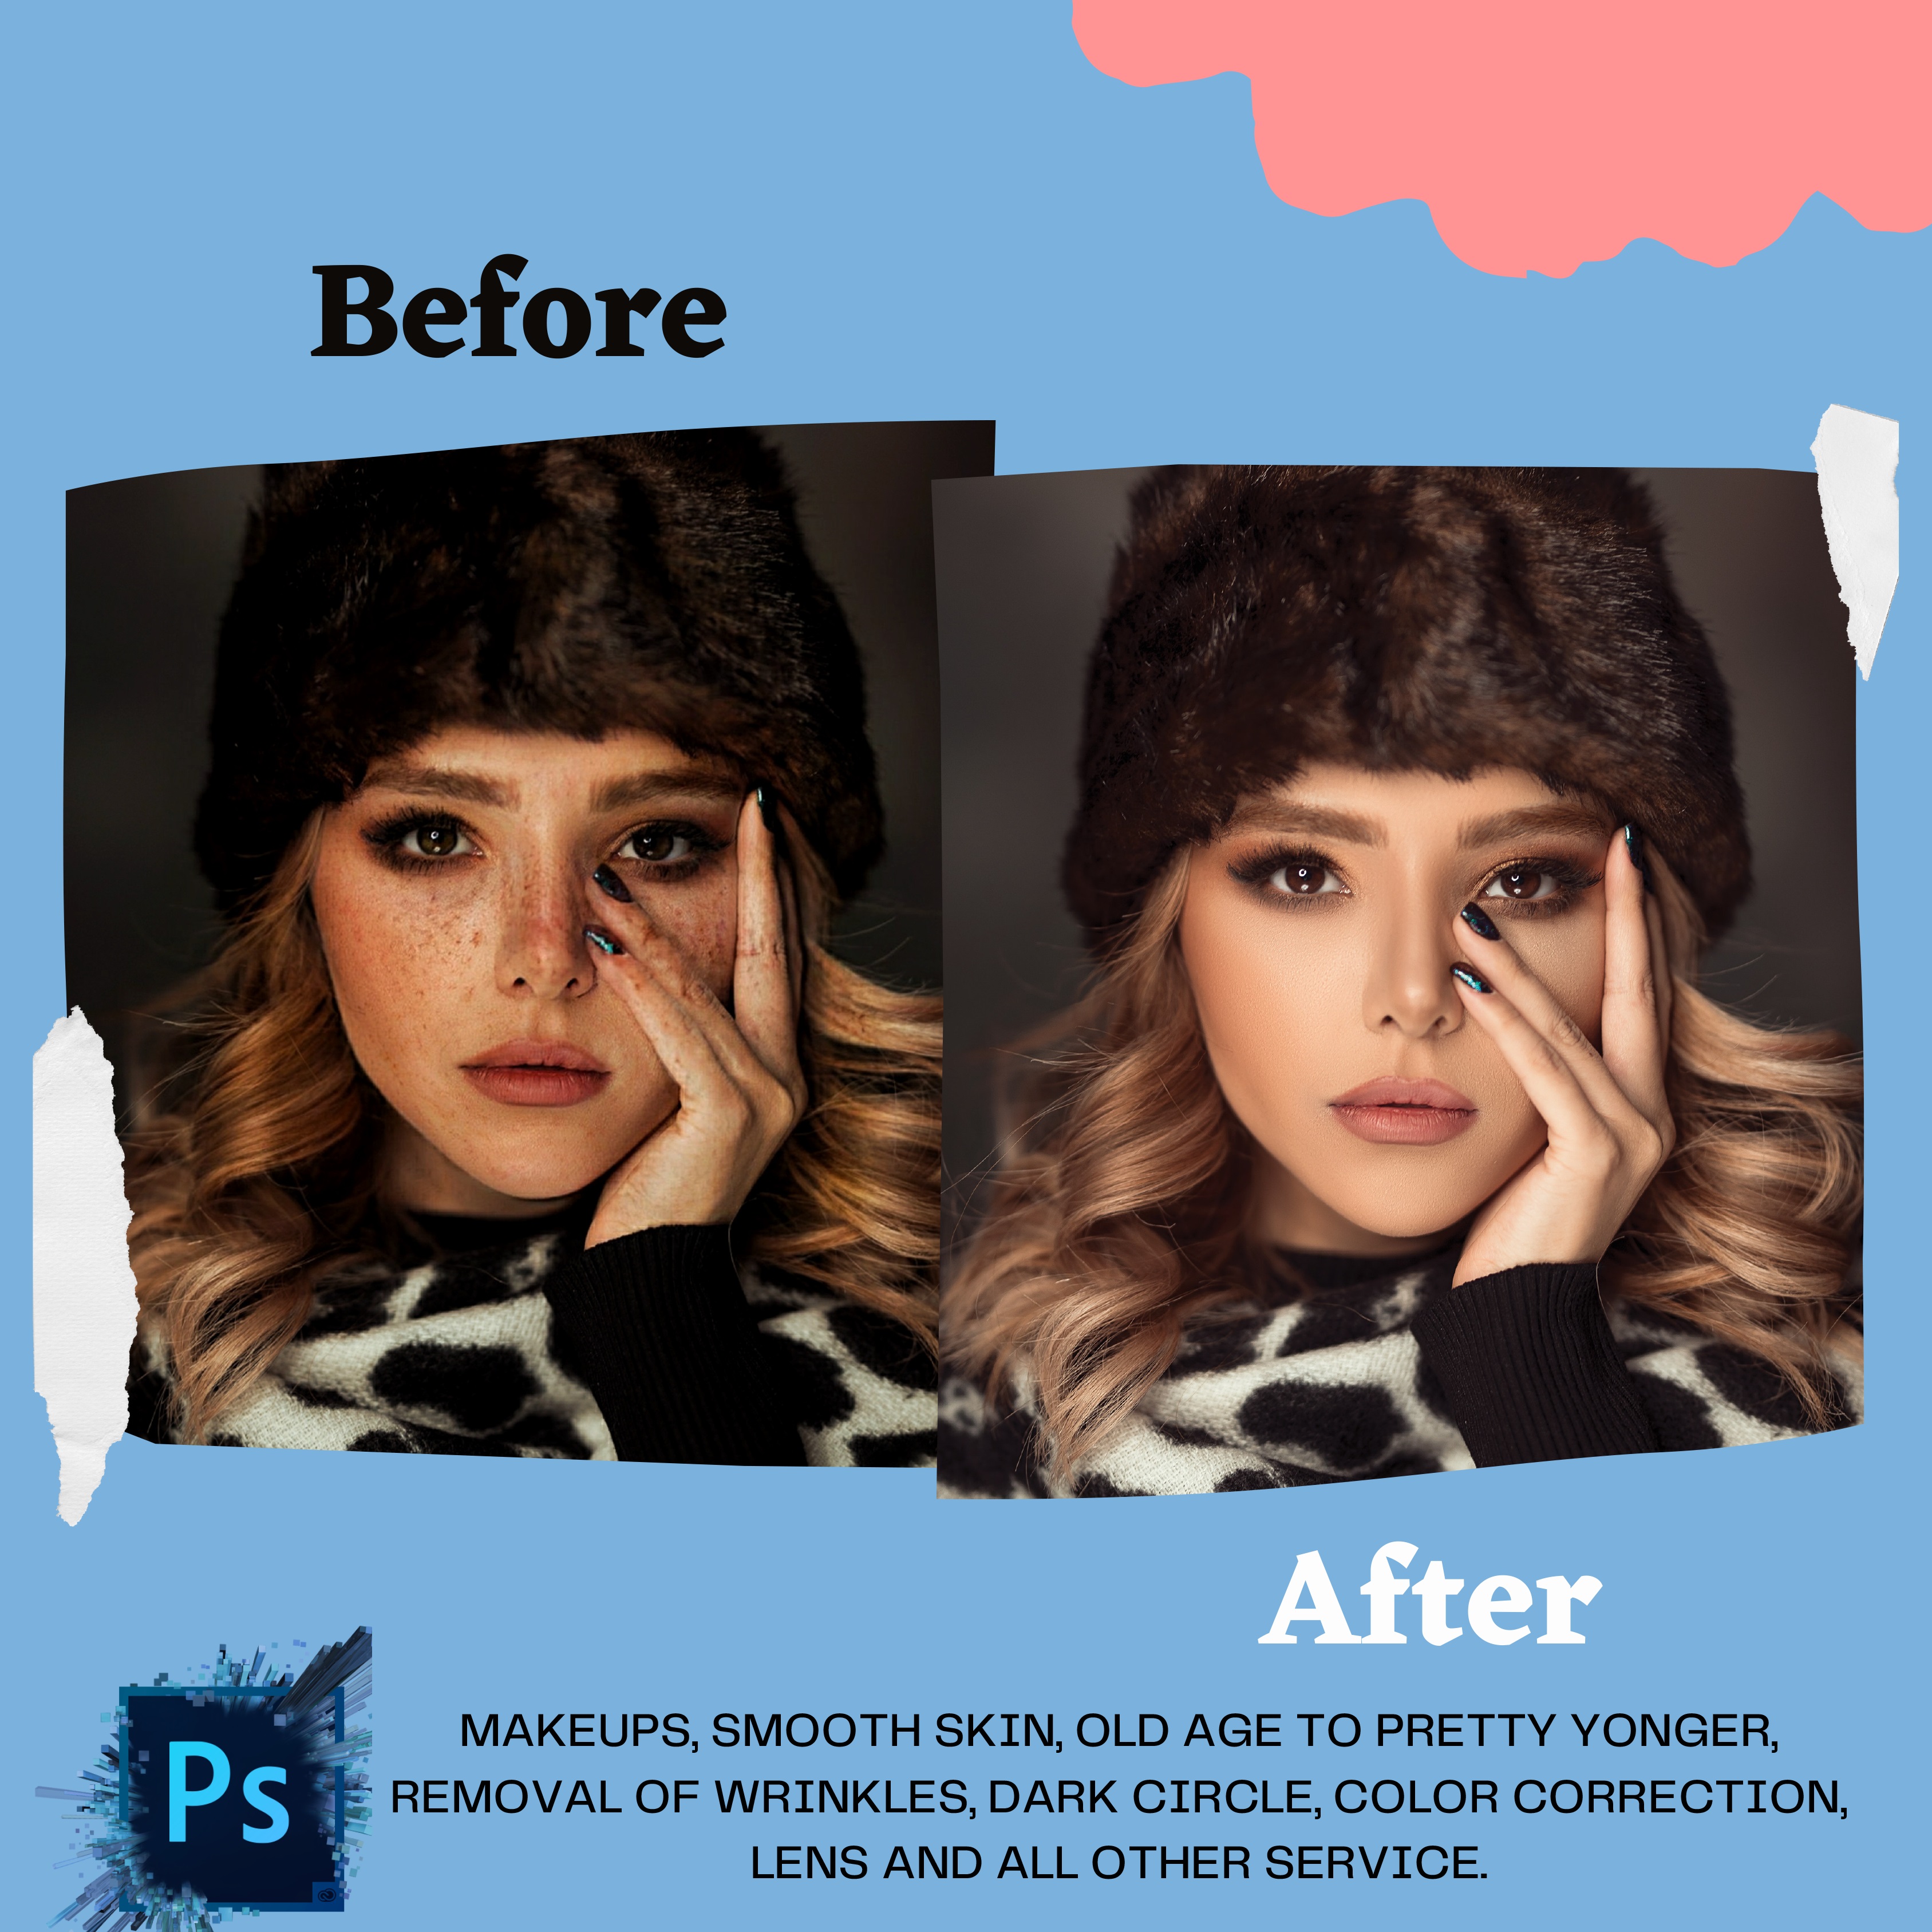 I will do any professional photoshop editing or photo background remove or manipulation